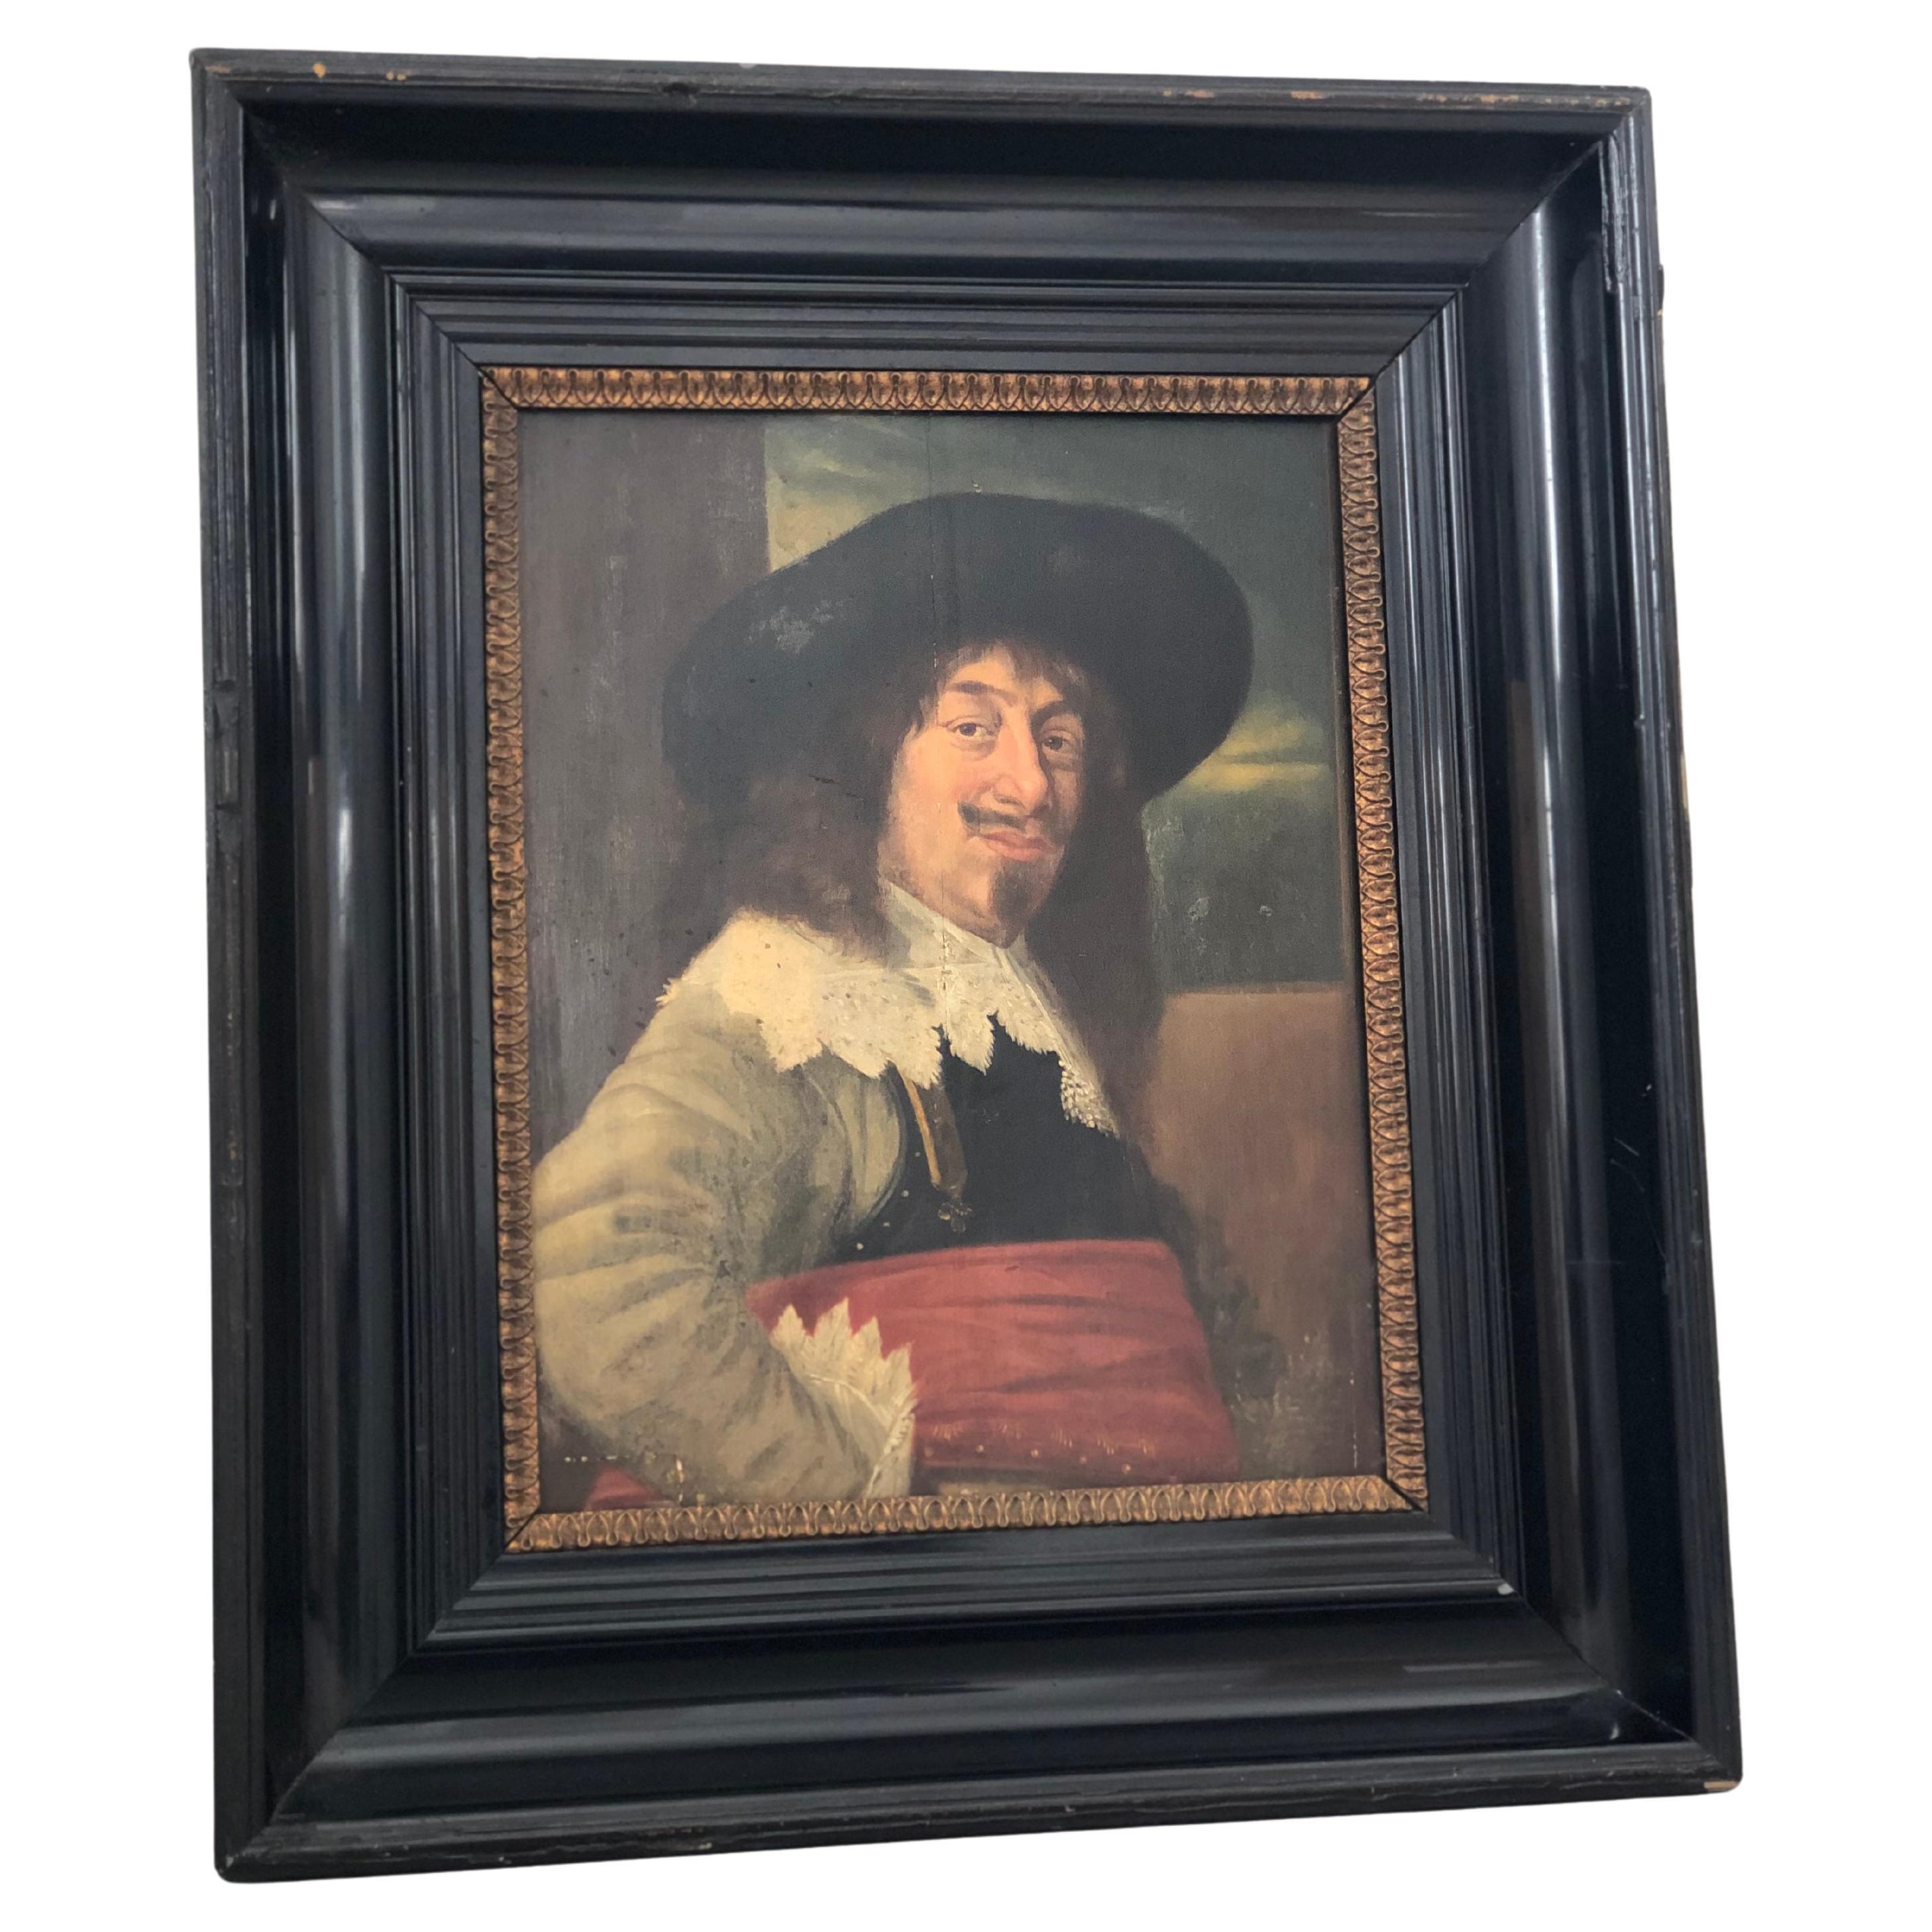 Late 19th Century Oil Painting of a Noble Man from the Dutch Golden Age Era For Sale